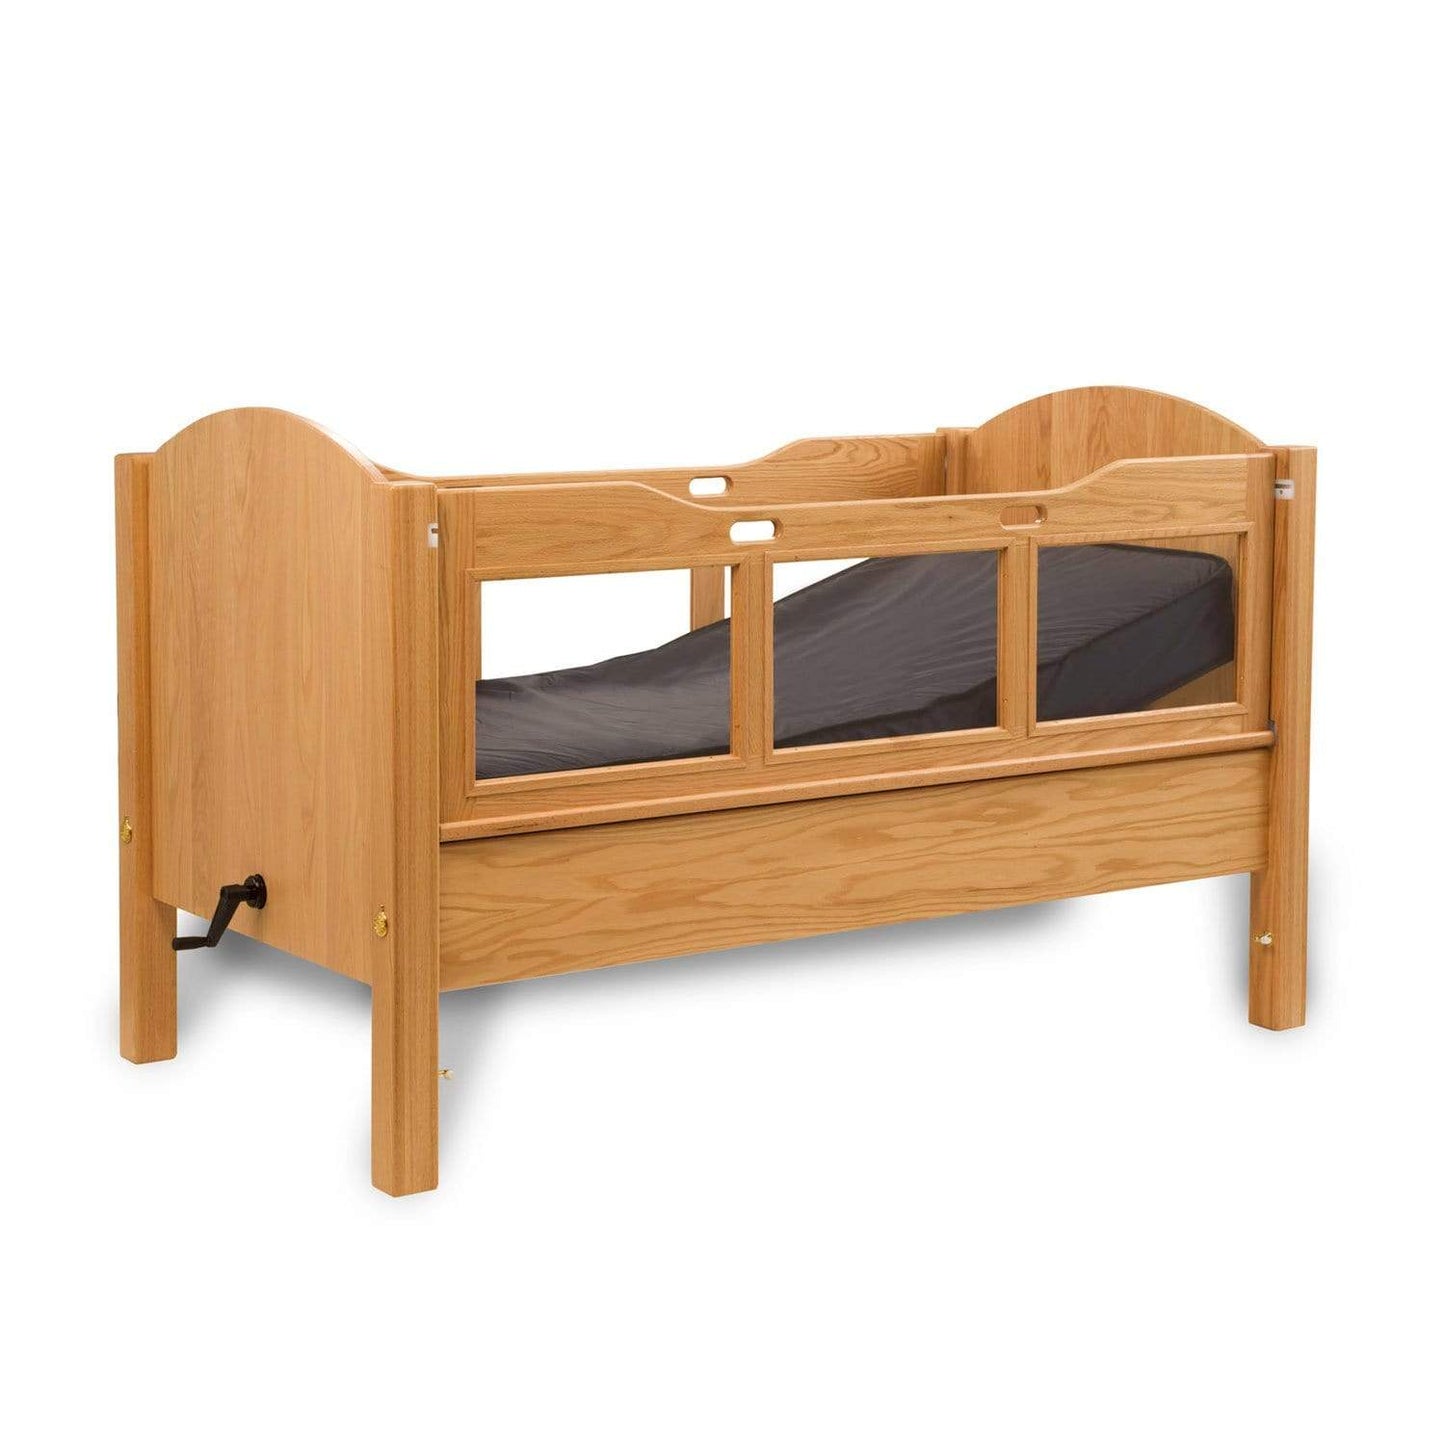 Beds by George Made to order Dream Series Manual Head Adjustable Double Size Bed - Standard